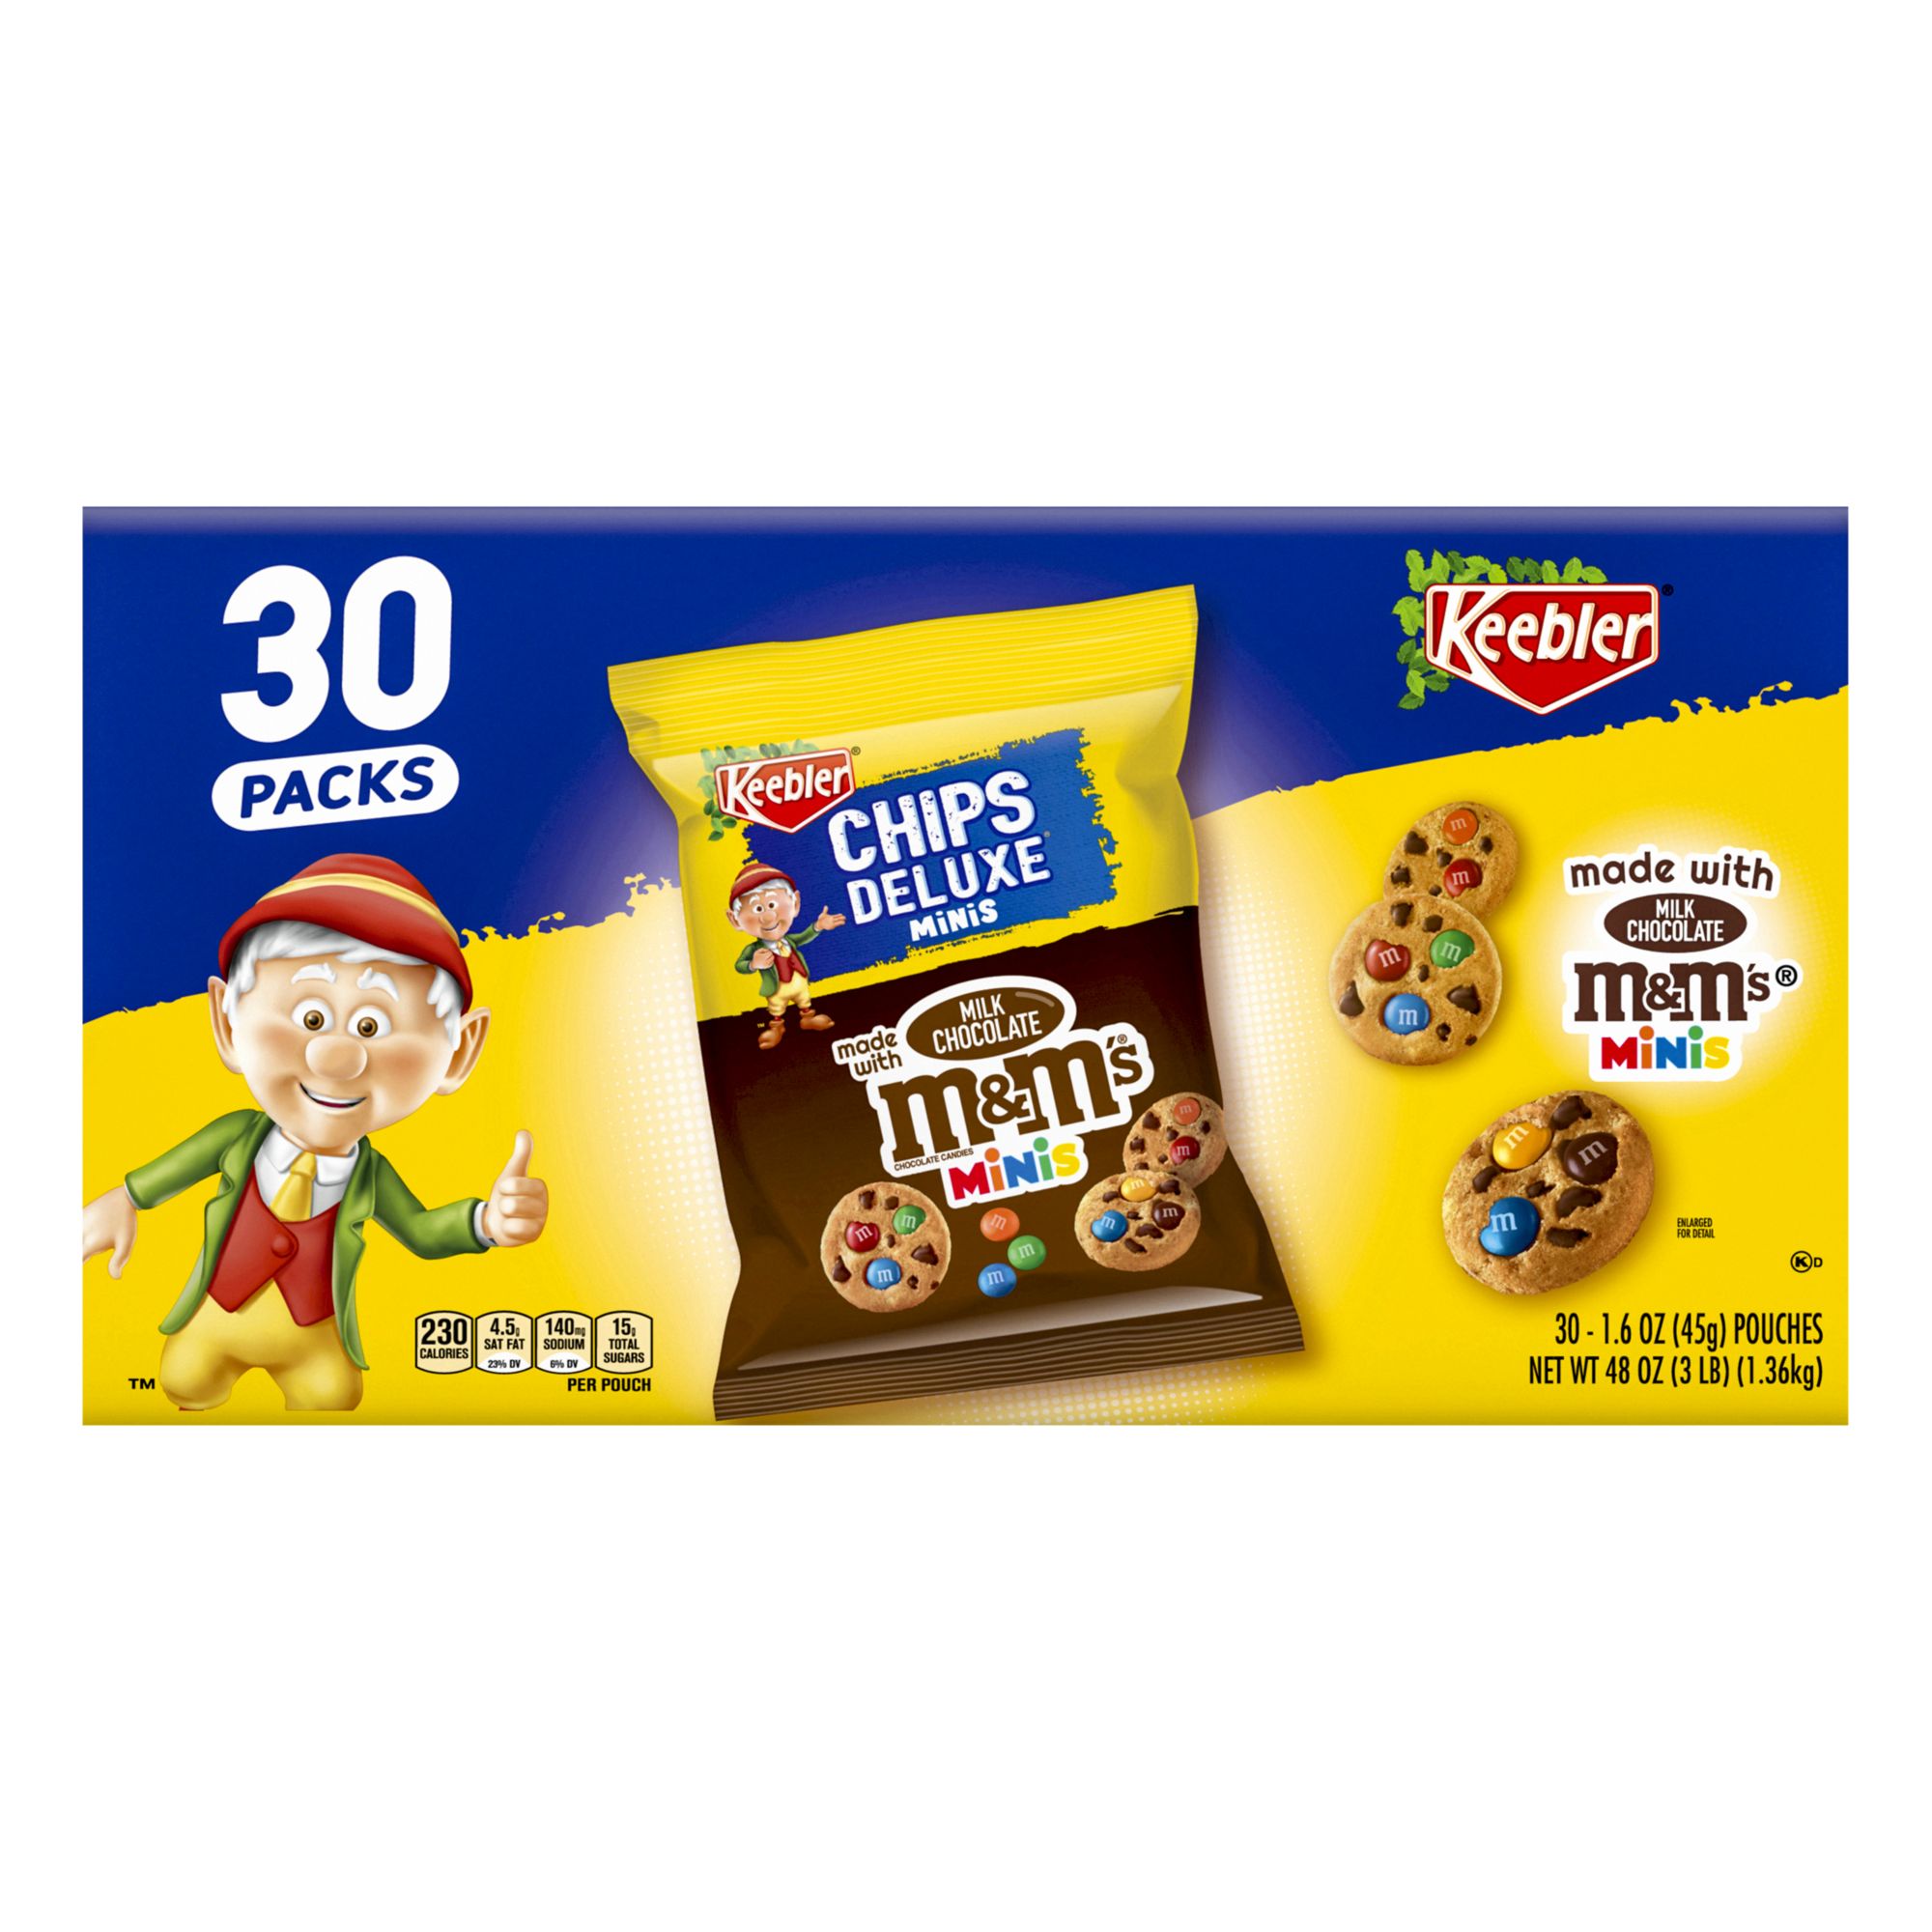 Keebler Chips Deluxe Rainbow Mini Cookies with M&Ms Minis, 12